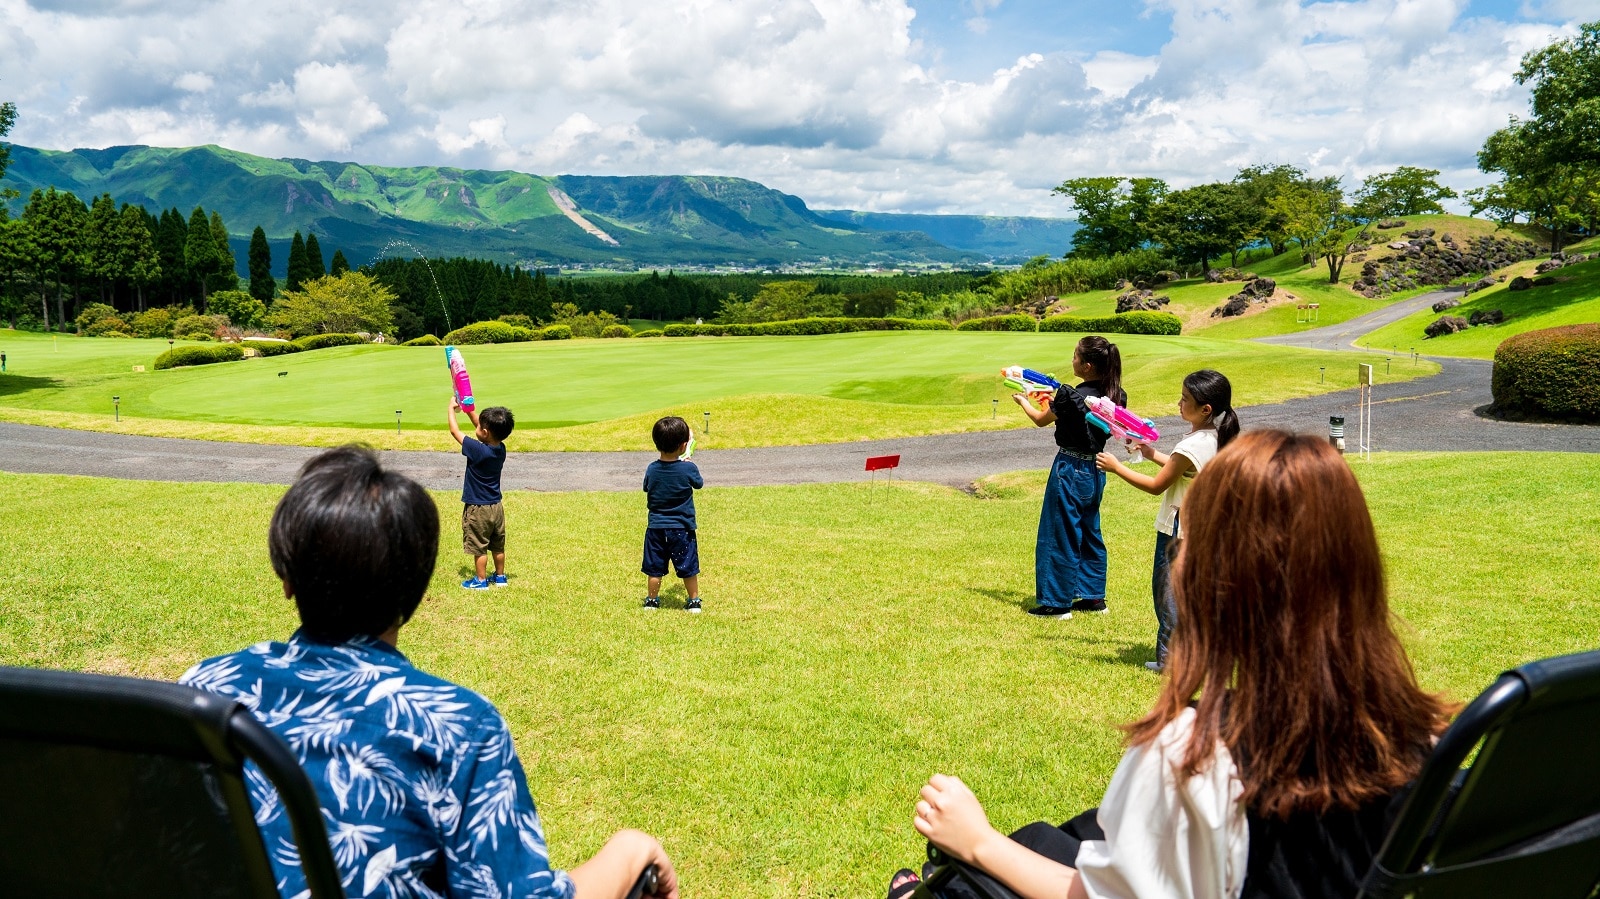 <Activity> Why don't you experience the magnificent nature with your family?